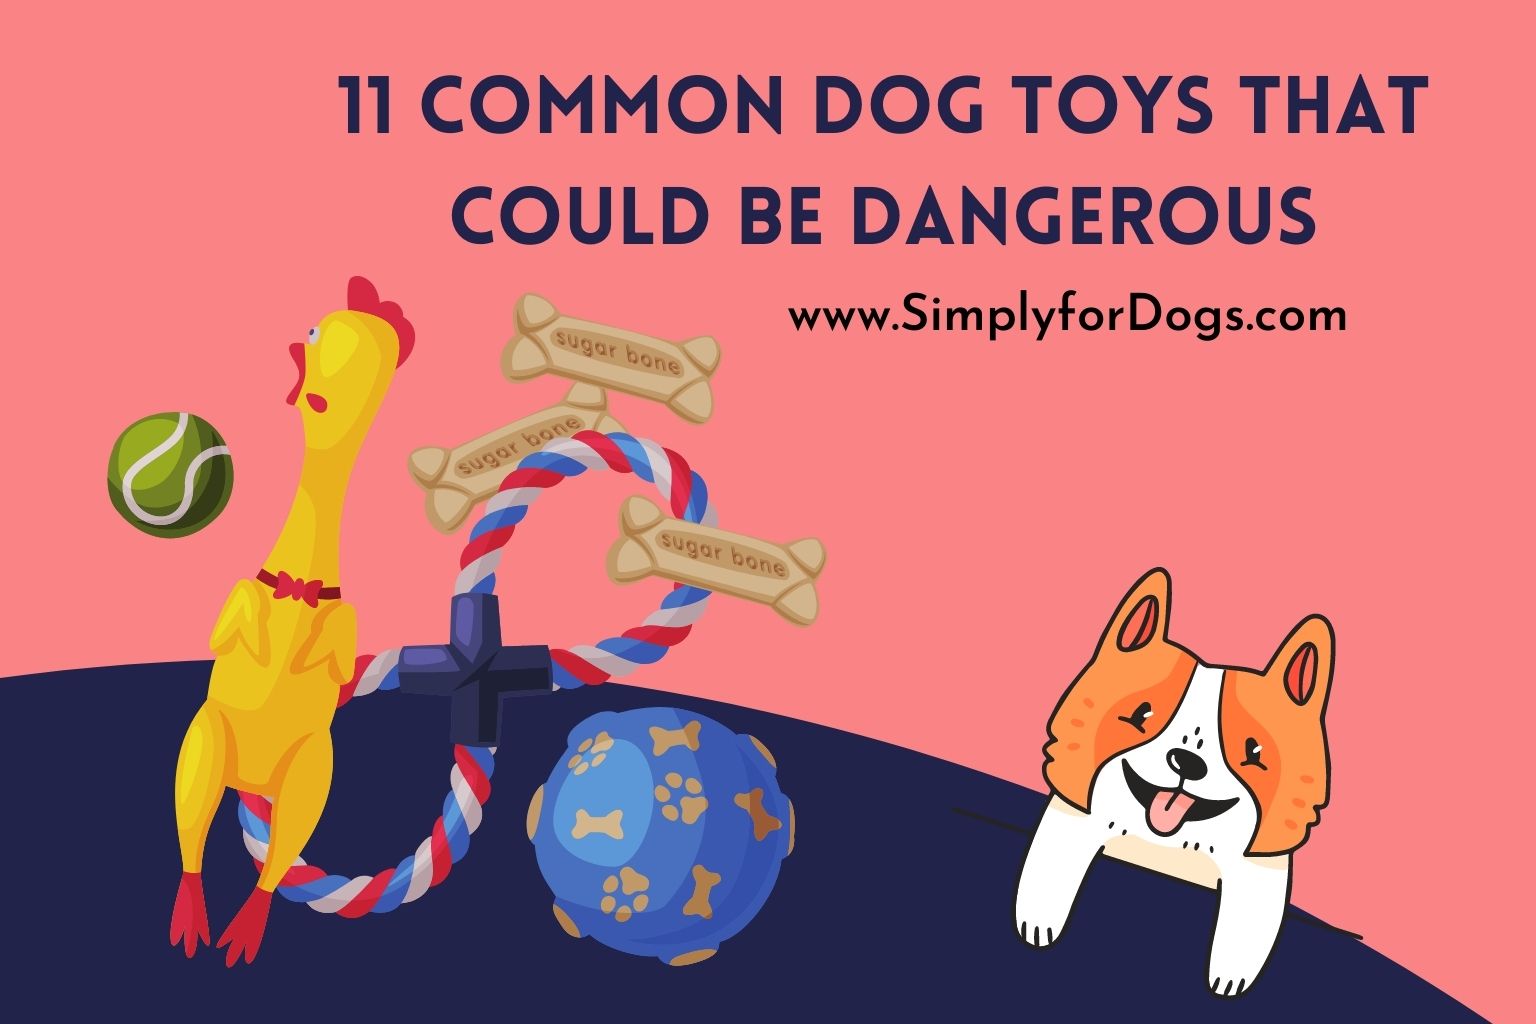 11 Common Dog Toys That Could Be Dangerous